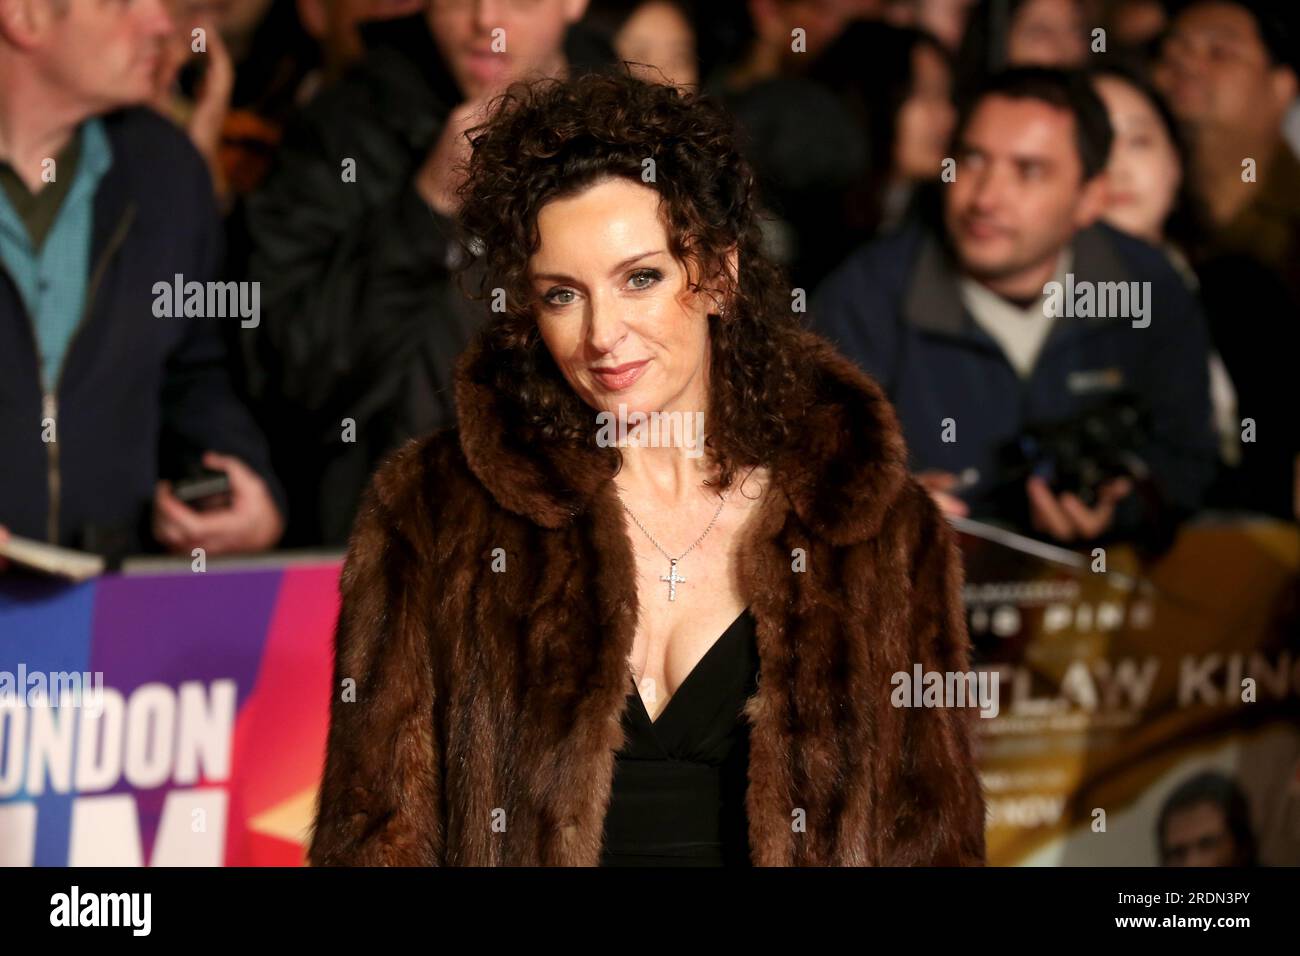 Gillian Berrie attends the European Premiere of "Outlaw King" during BFI London Film Festival in London. Stock Photo